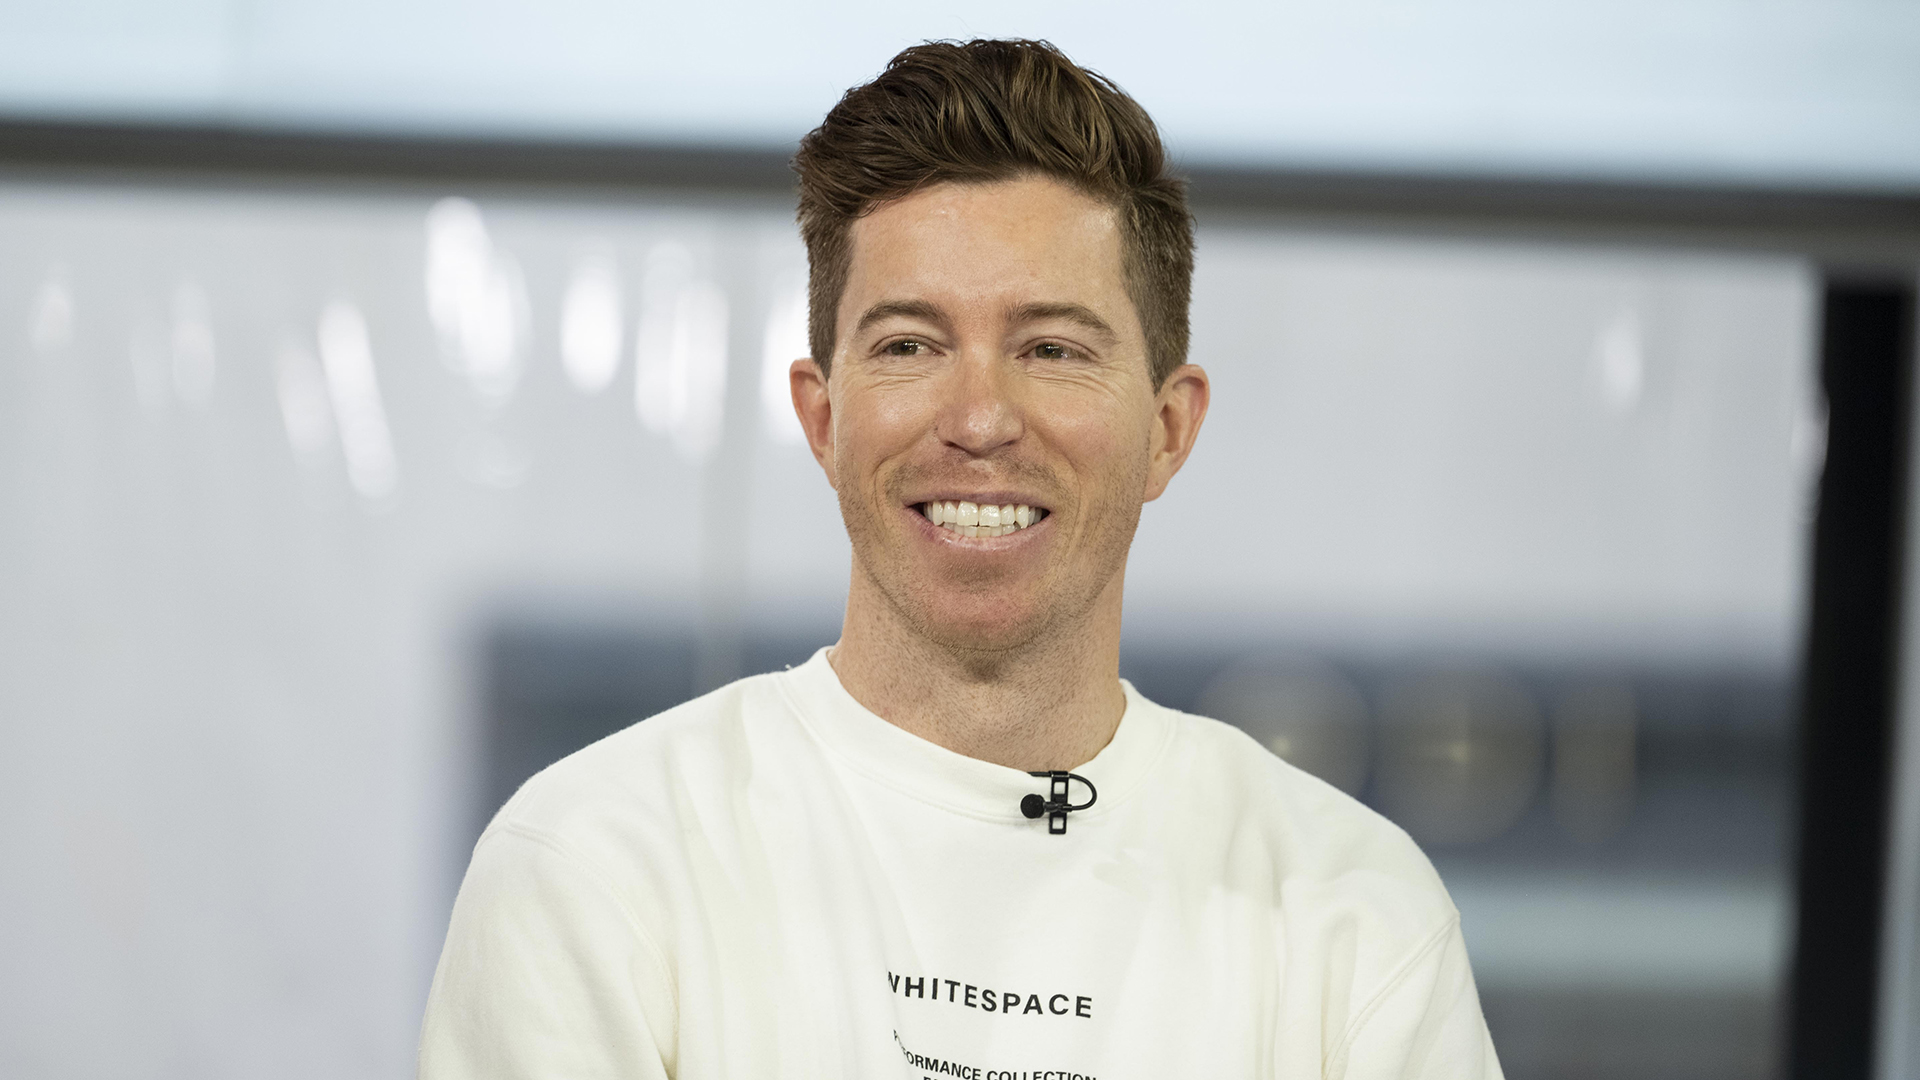 Shaun White talks new product line Whitespace, life after Olympics